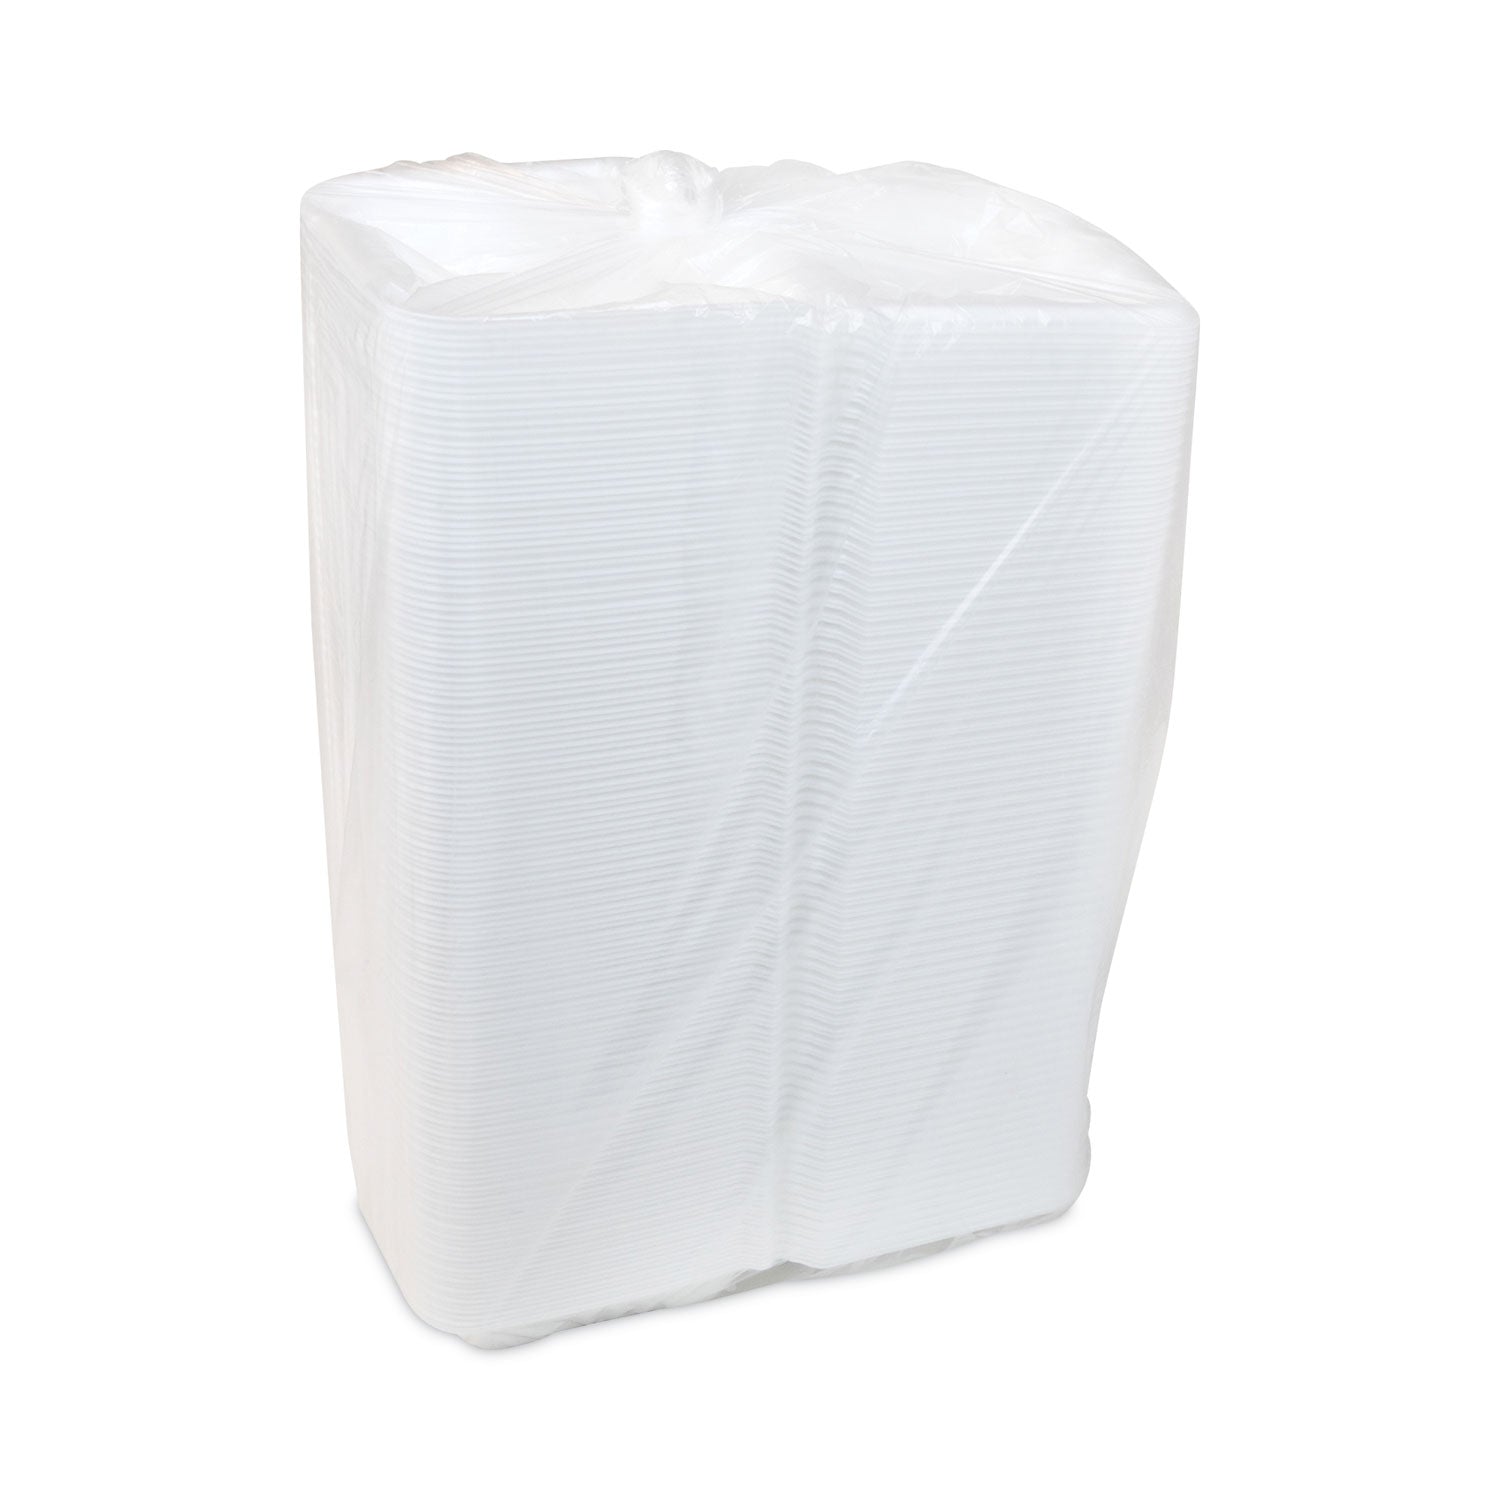 vented-foam-hinged-lid-container-dual-tab-lock-economy-842-x-815-x-3-white-150-carton_pctytd18801econ - 4